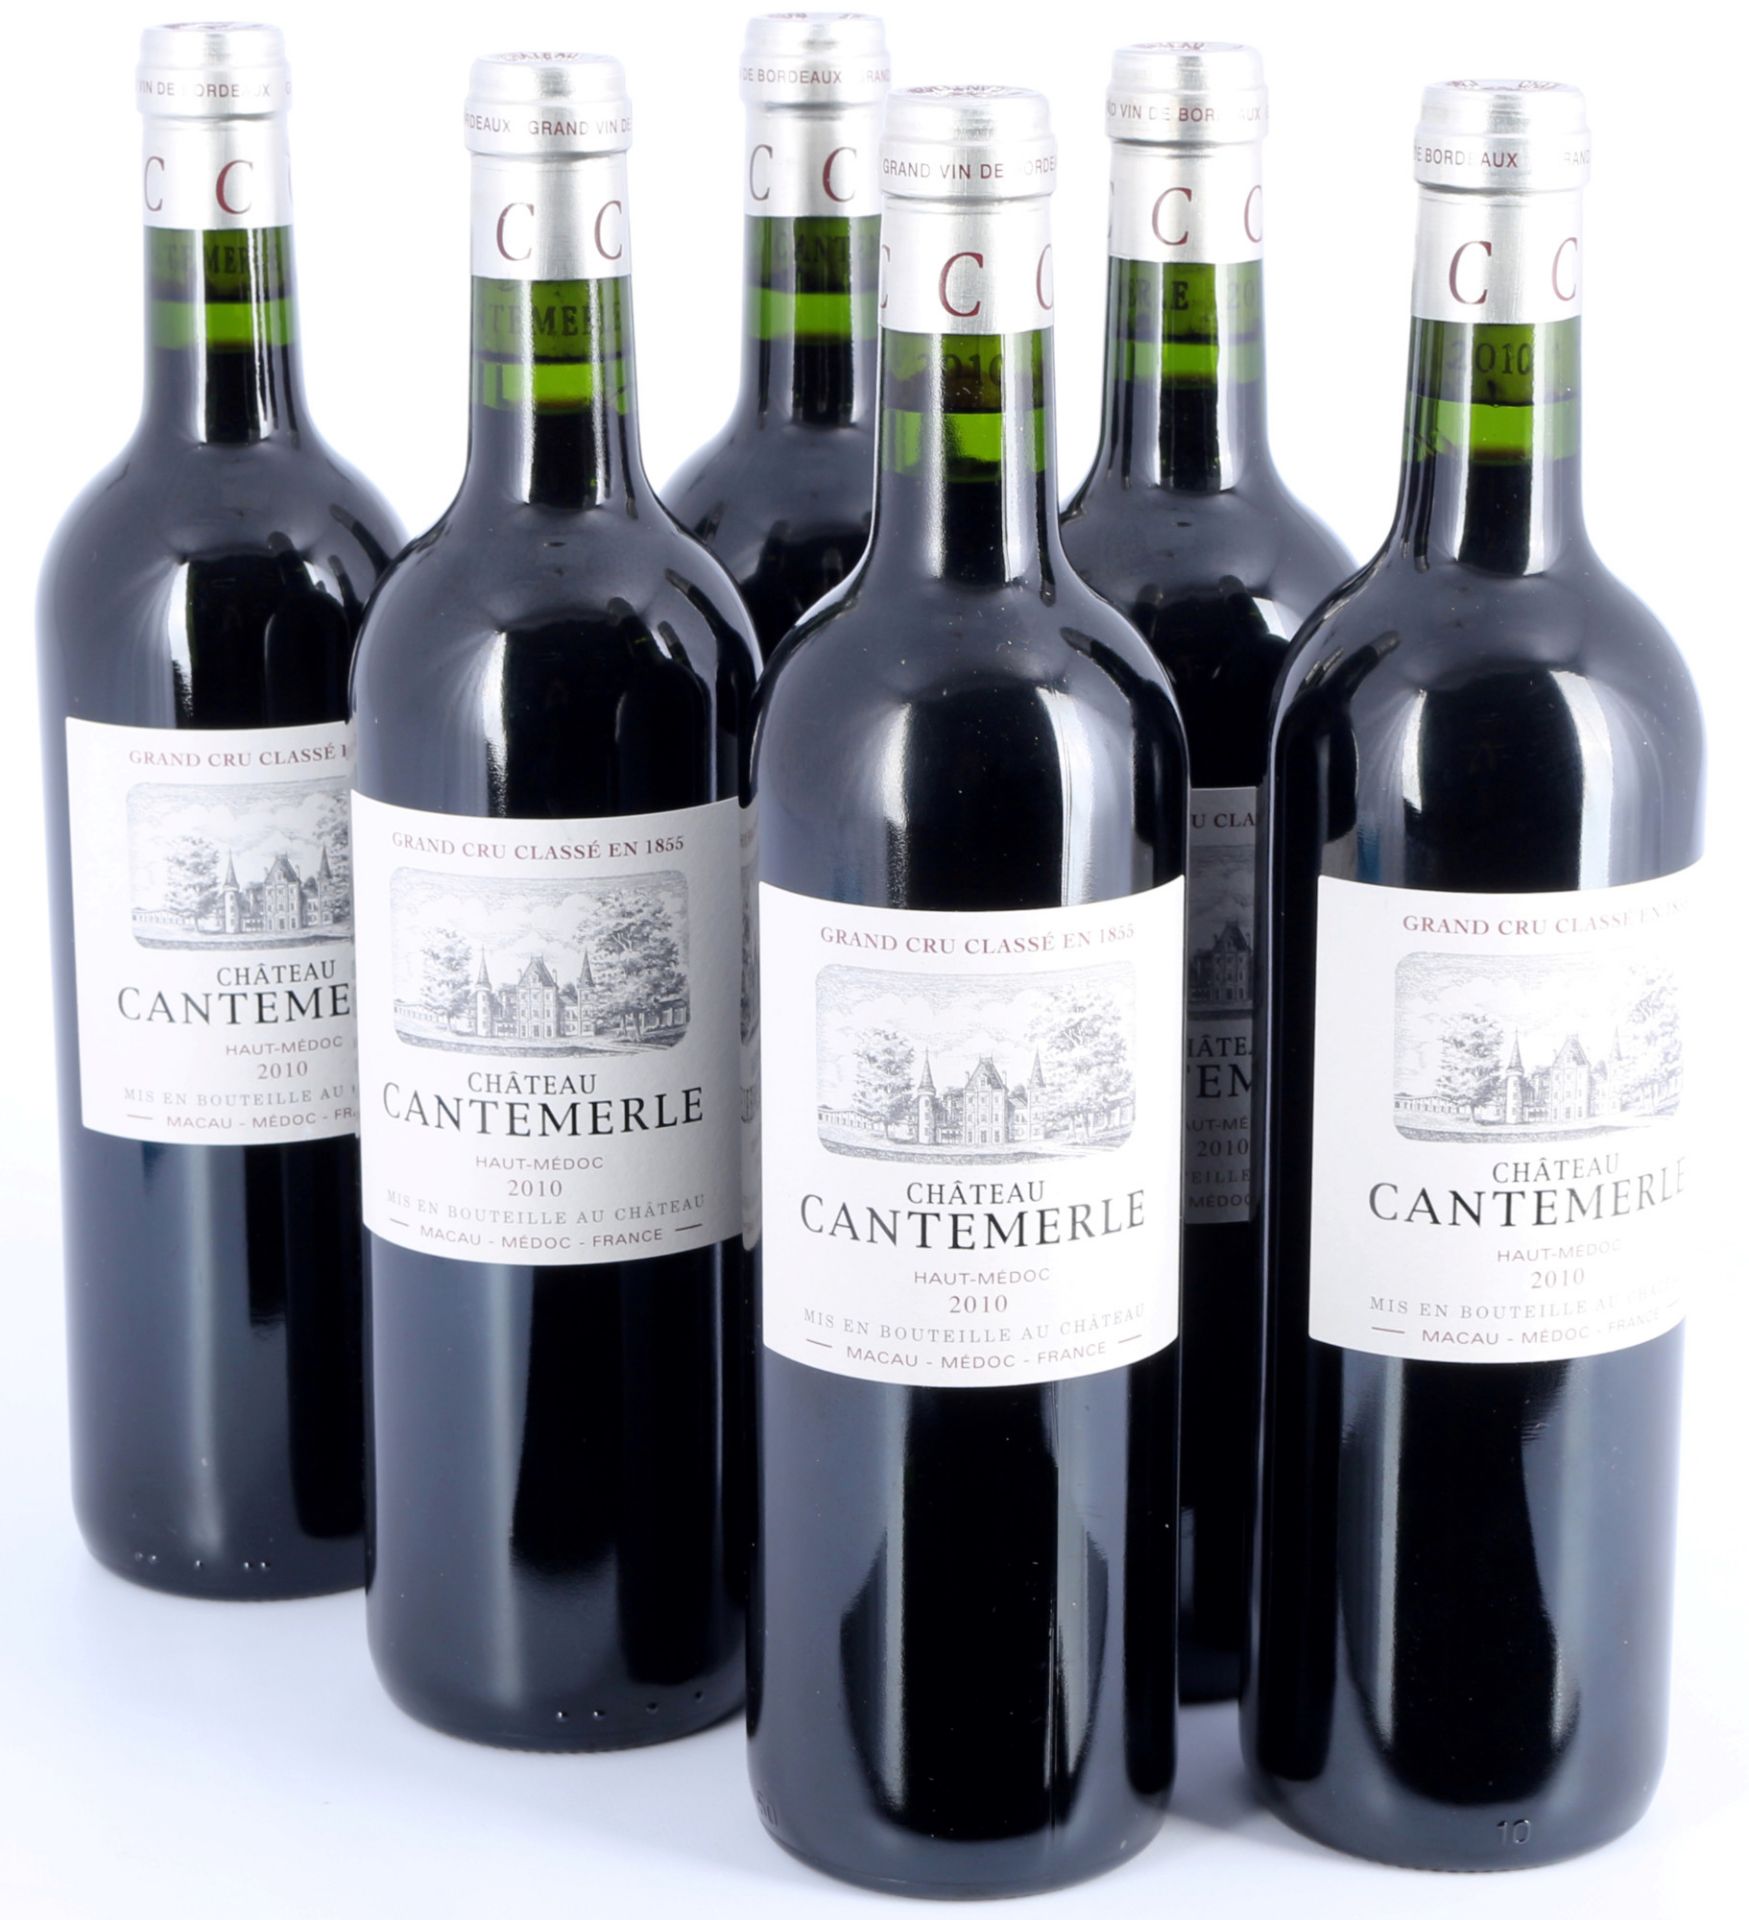 2010 Chateau Cantemerle 6 bottles,